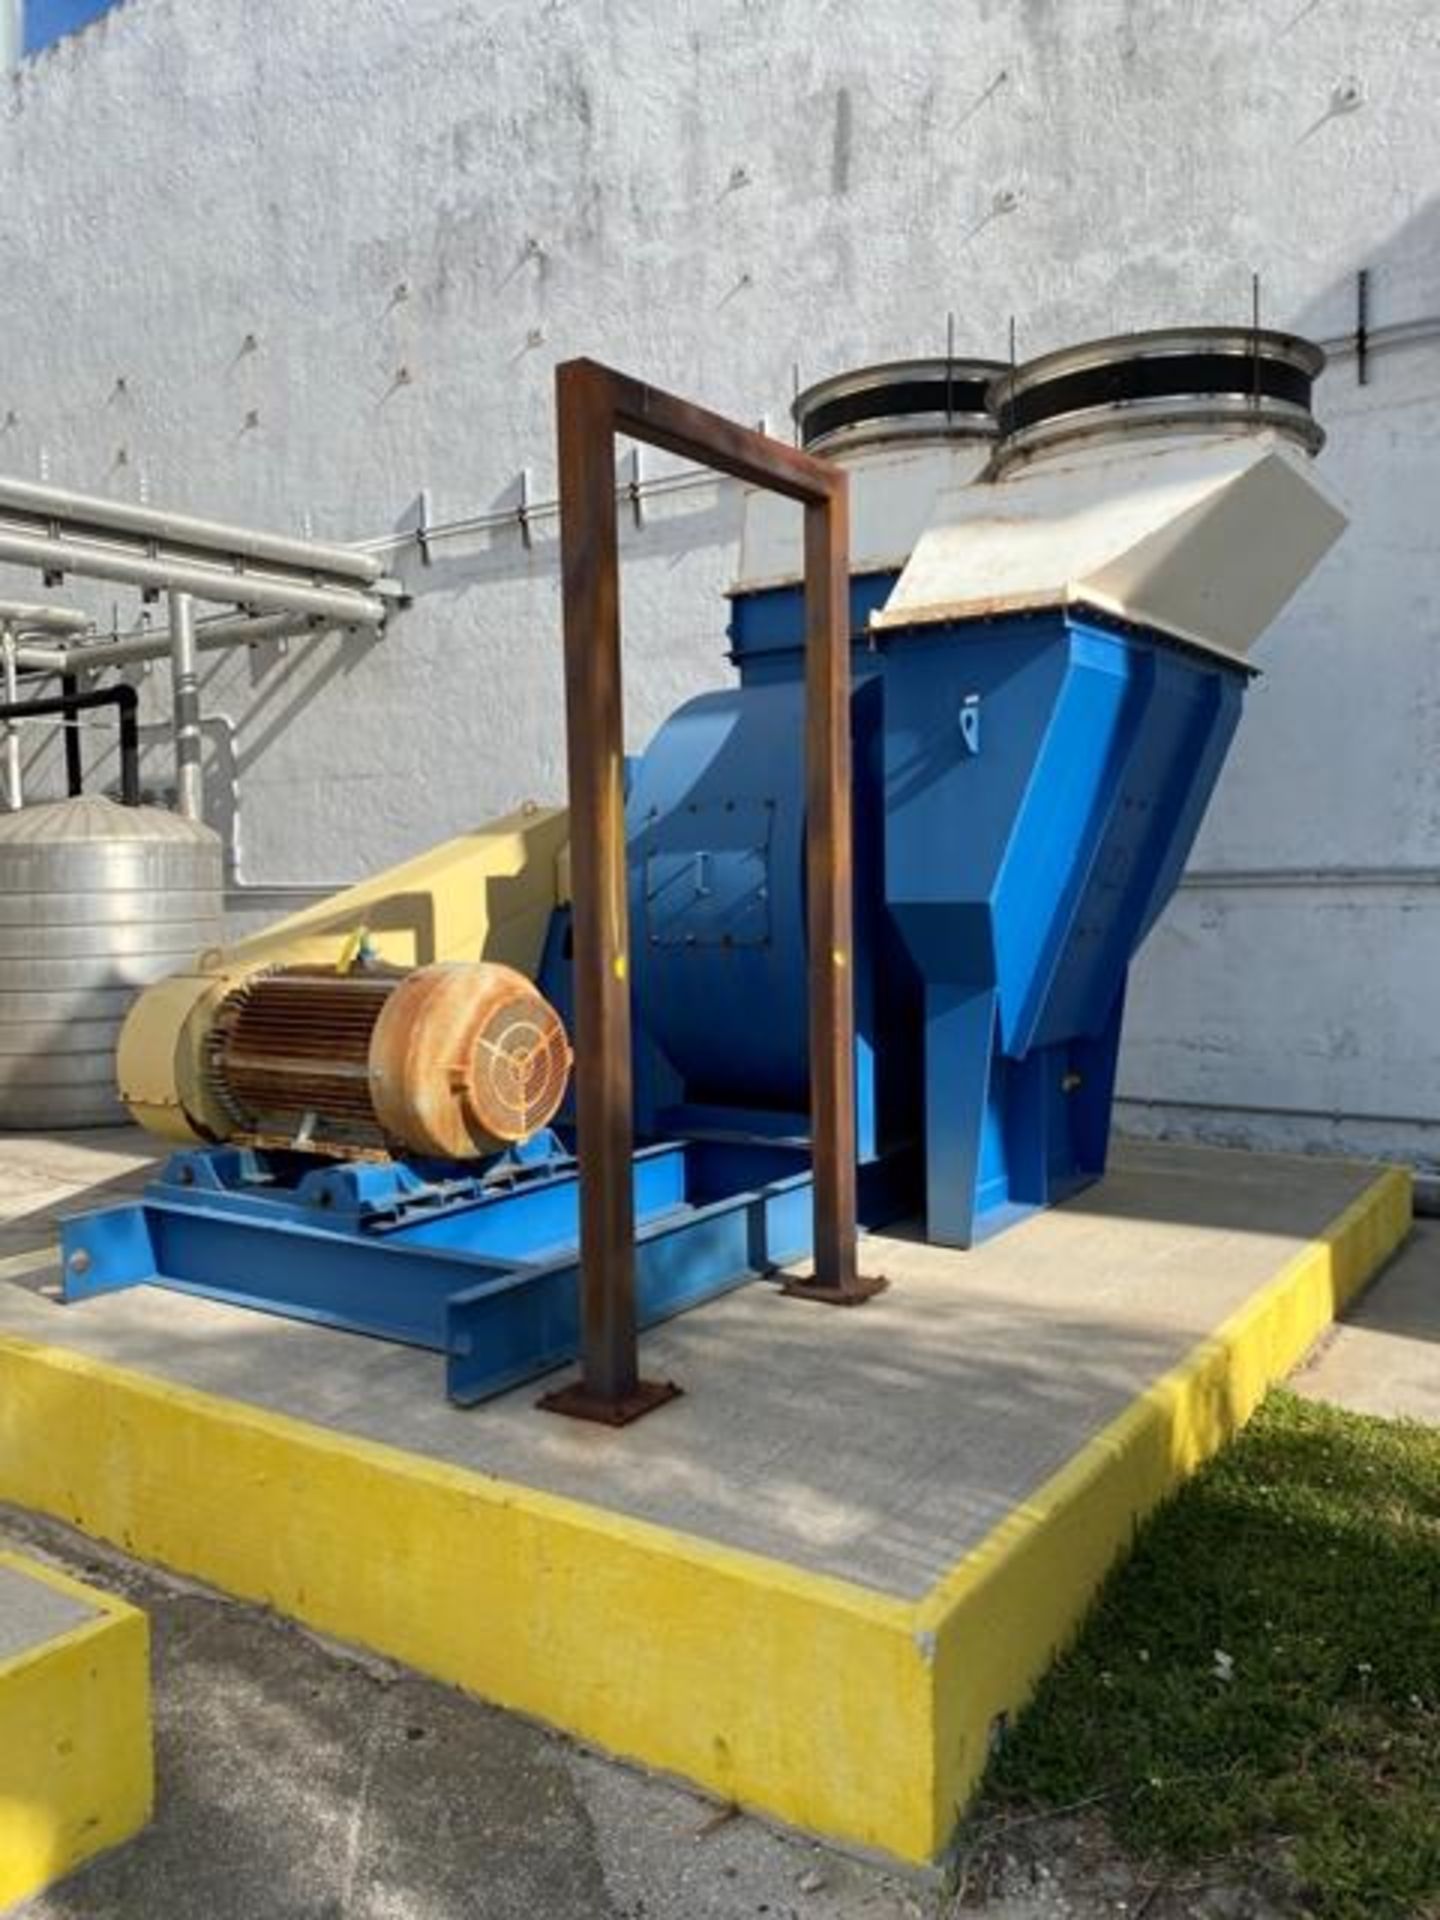 Twin City Fan & Blower, Size = 445, S/N #14512680-1-1, Type = BCS-SW, Class 26 Rigging Price $750 - Image 2 of 5